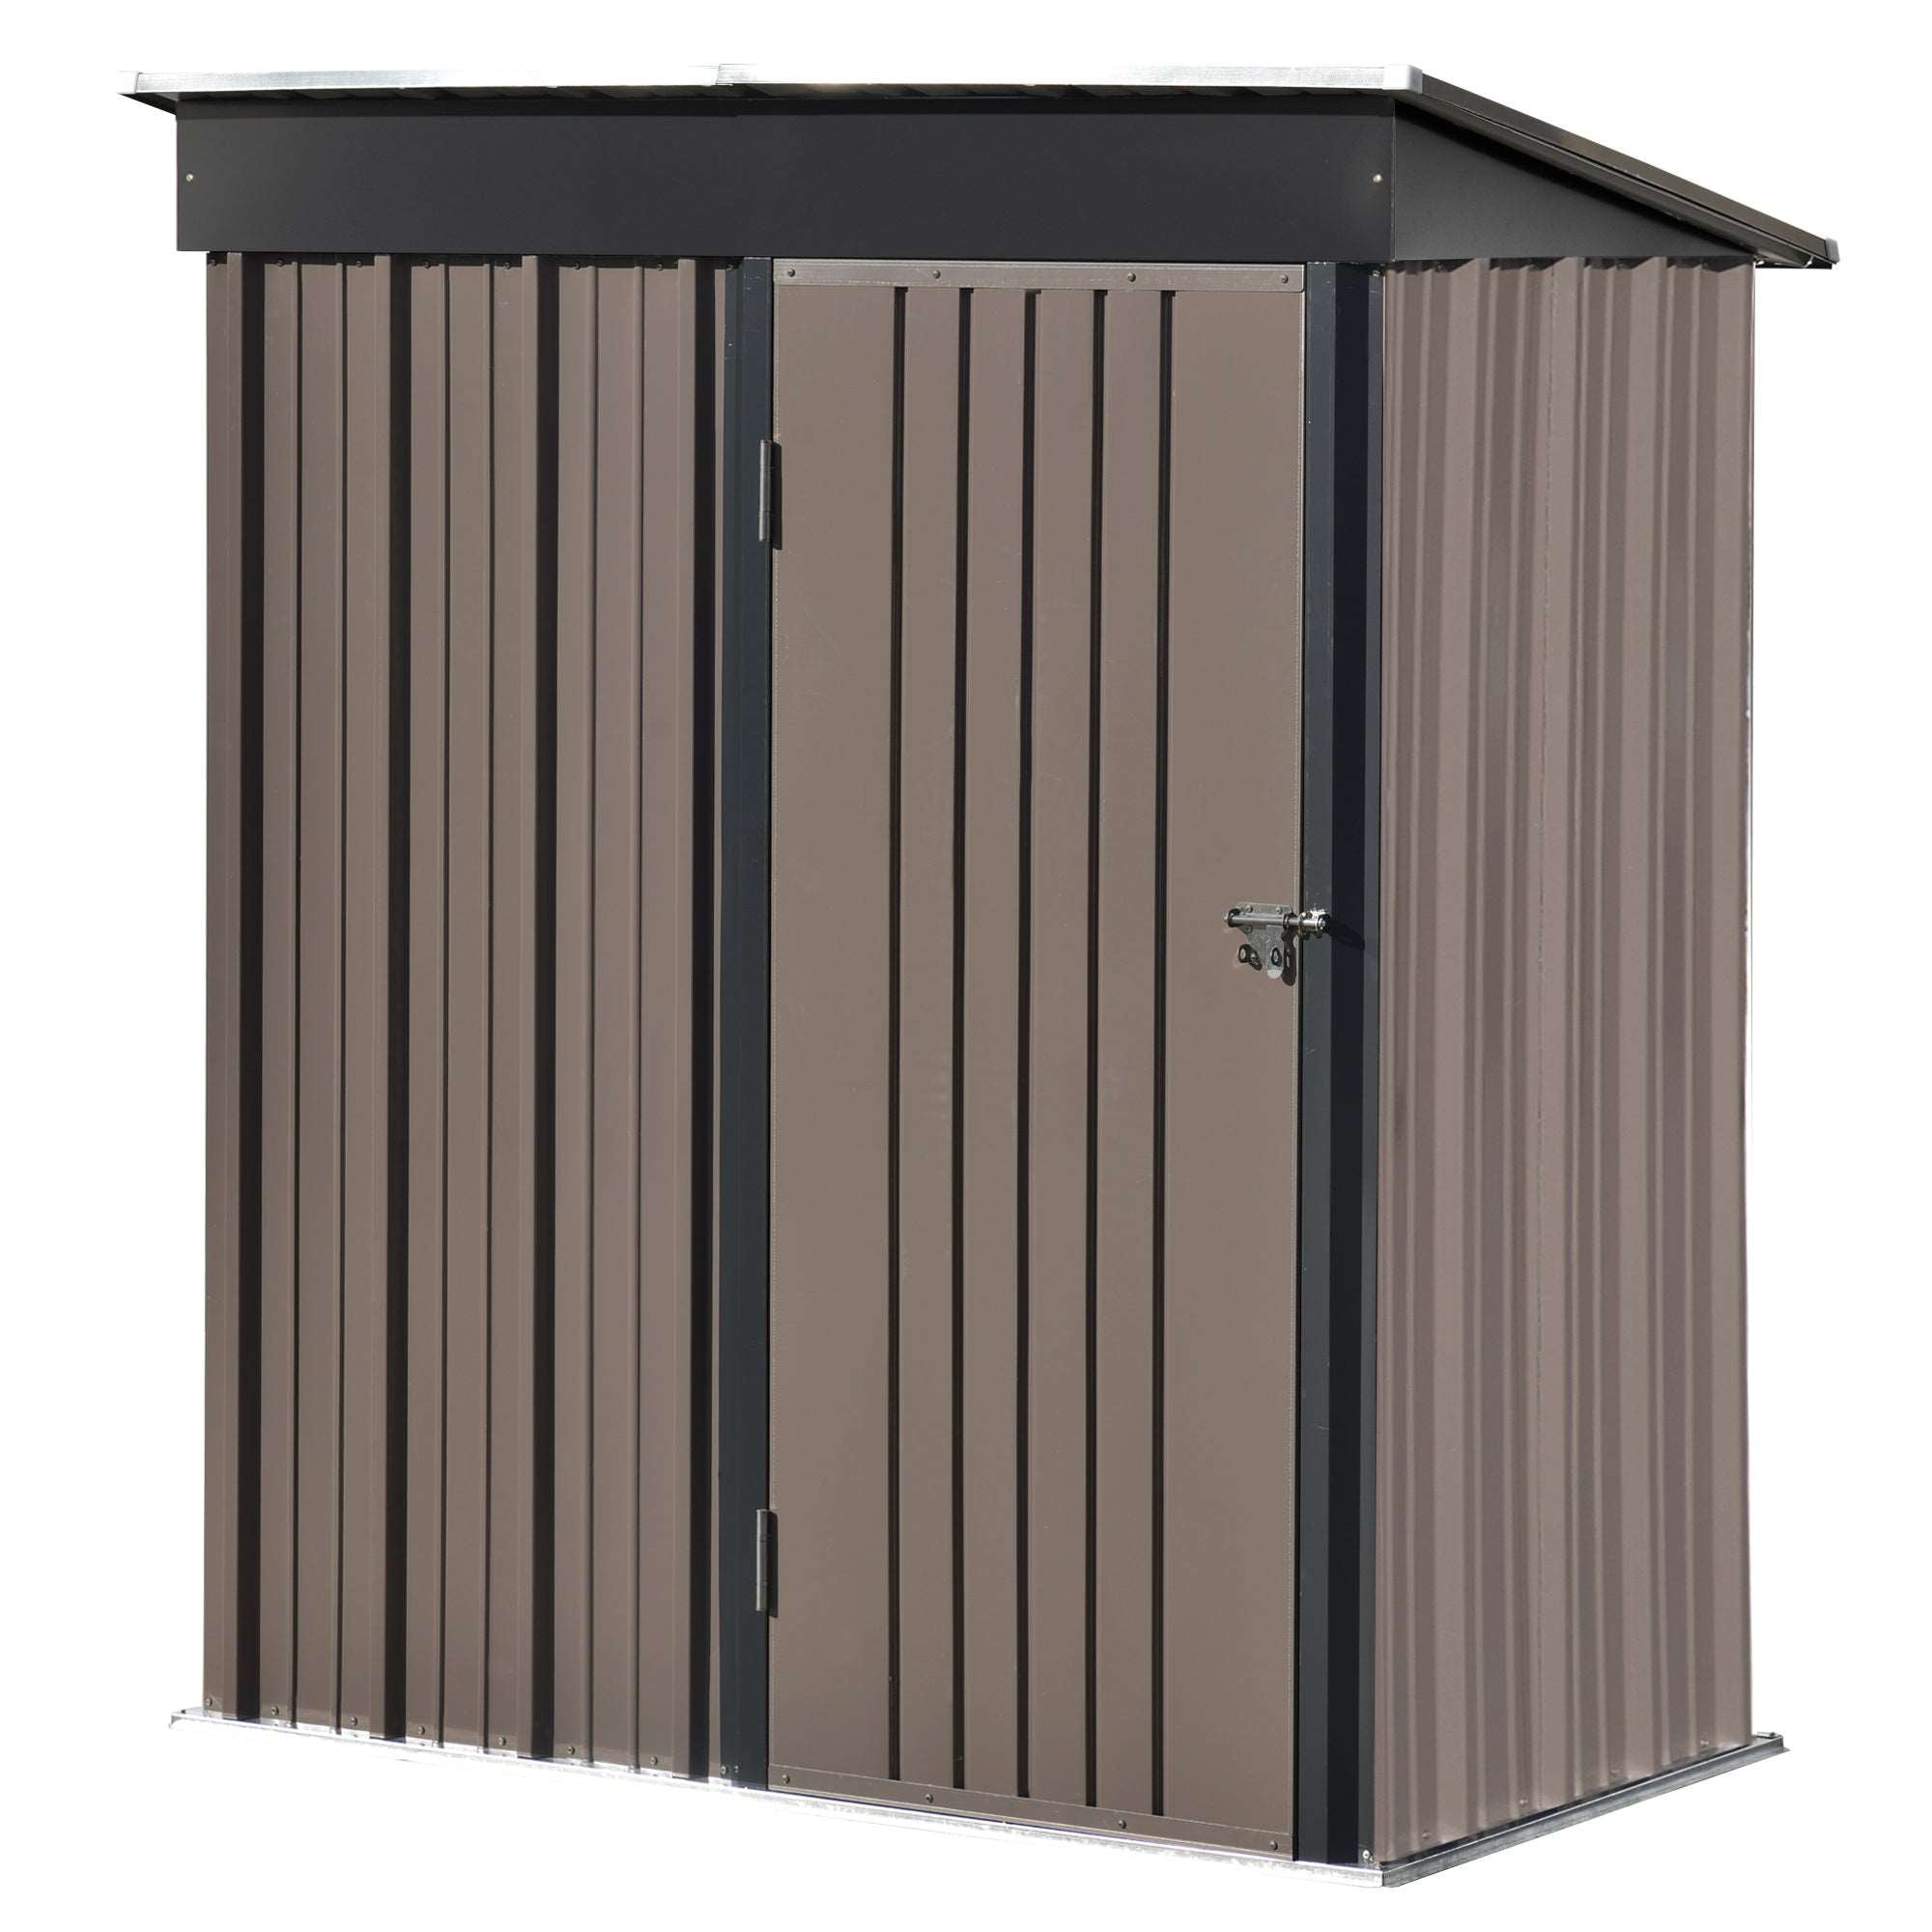 Gardener's Tool Shed, Garden Shed with Lock